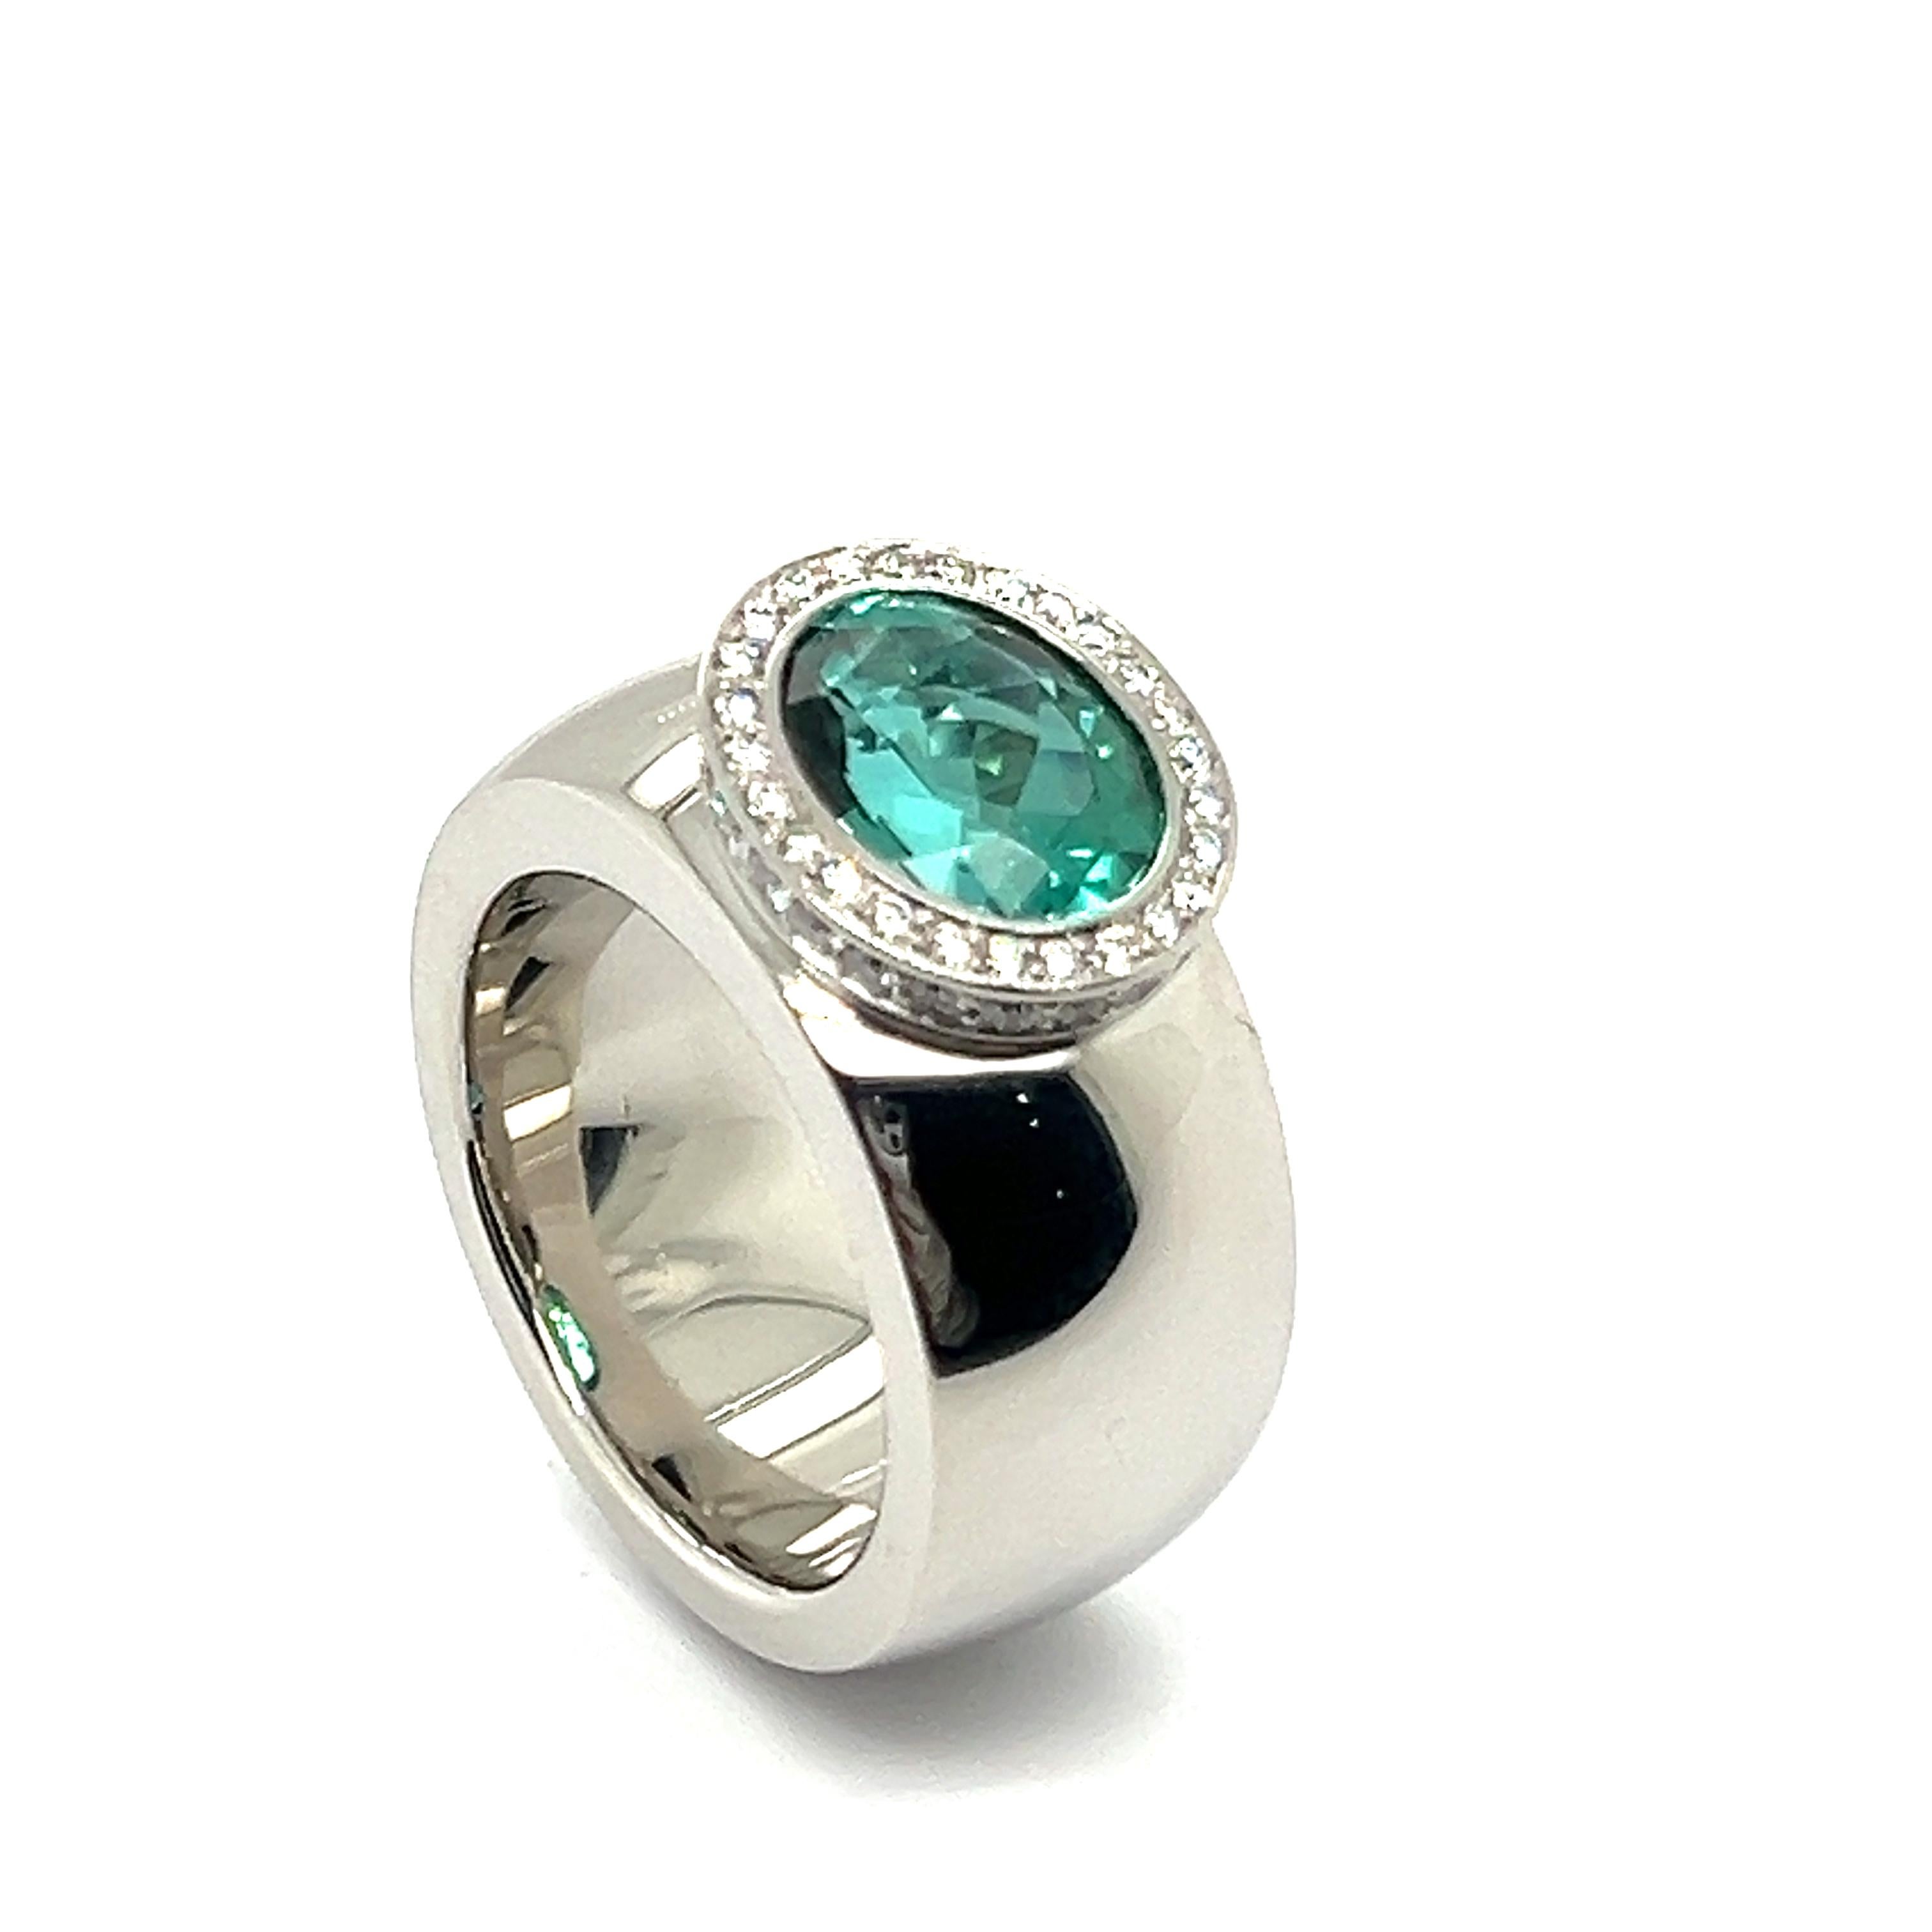 Behold a captivating statement ring by the visionary designer Jochen Pohl. Crafted in fine platinum, its thick band exudes strength and elegance simultaneously. 

At its heart lies a mesmerizing oval-cut tourmaline, weighing 3.96 carats and